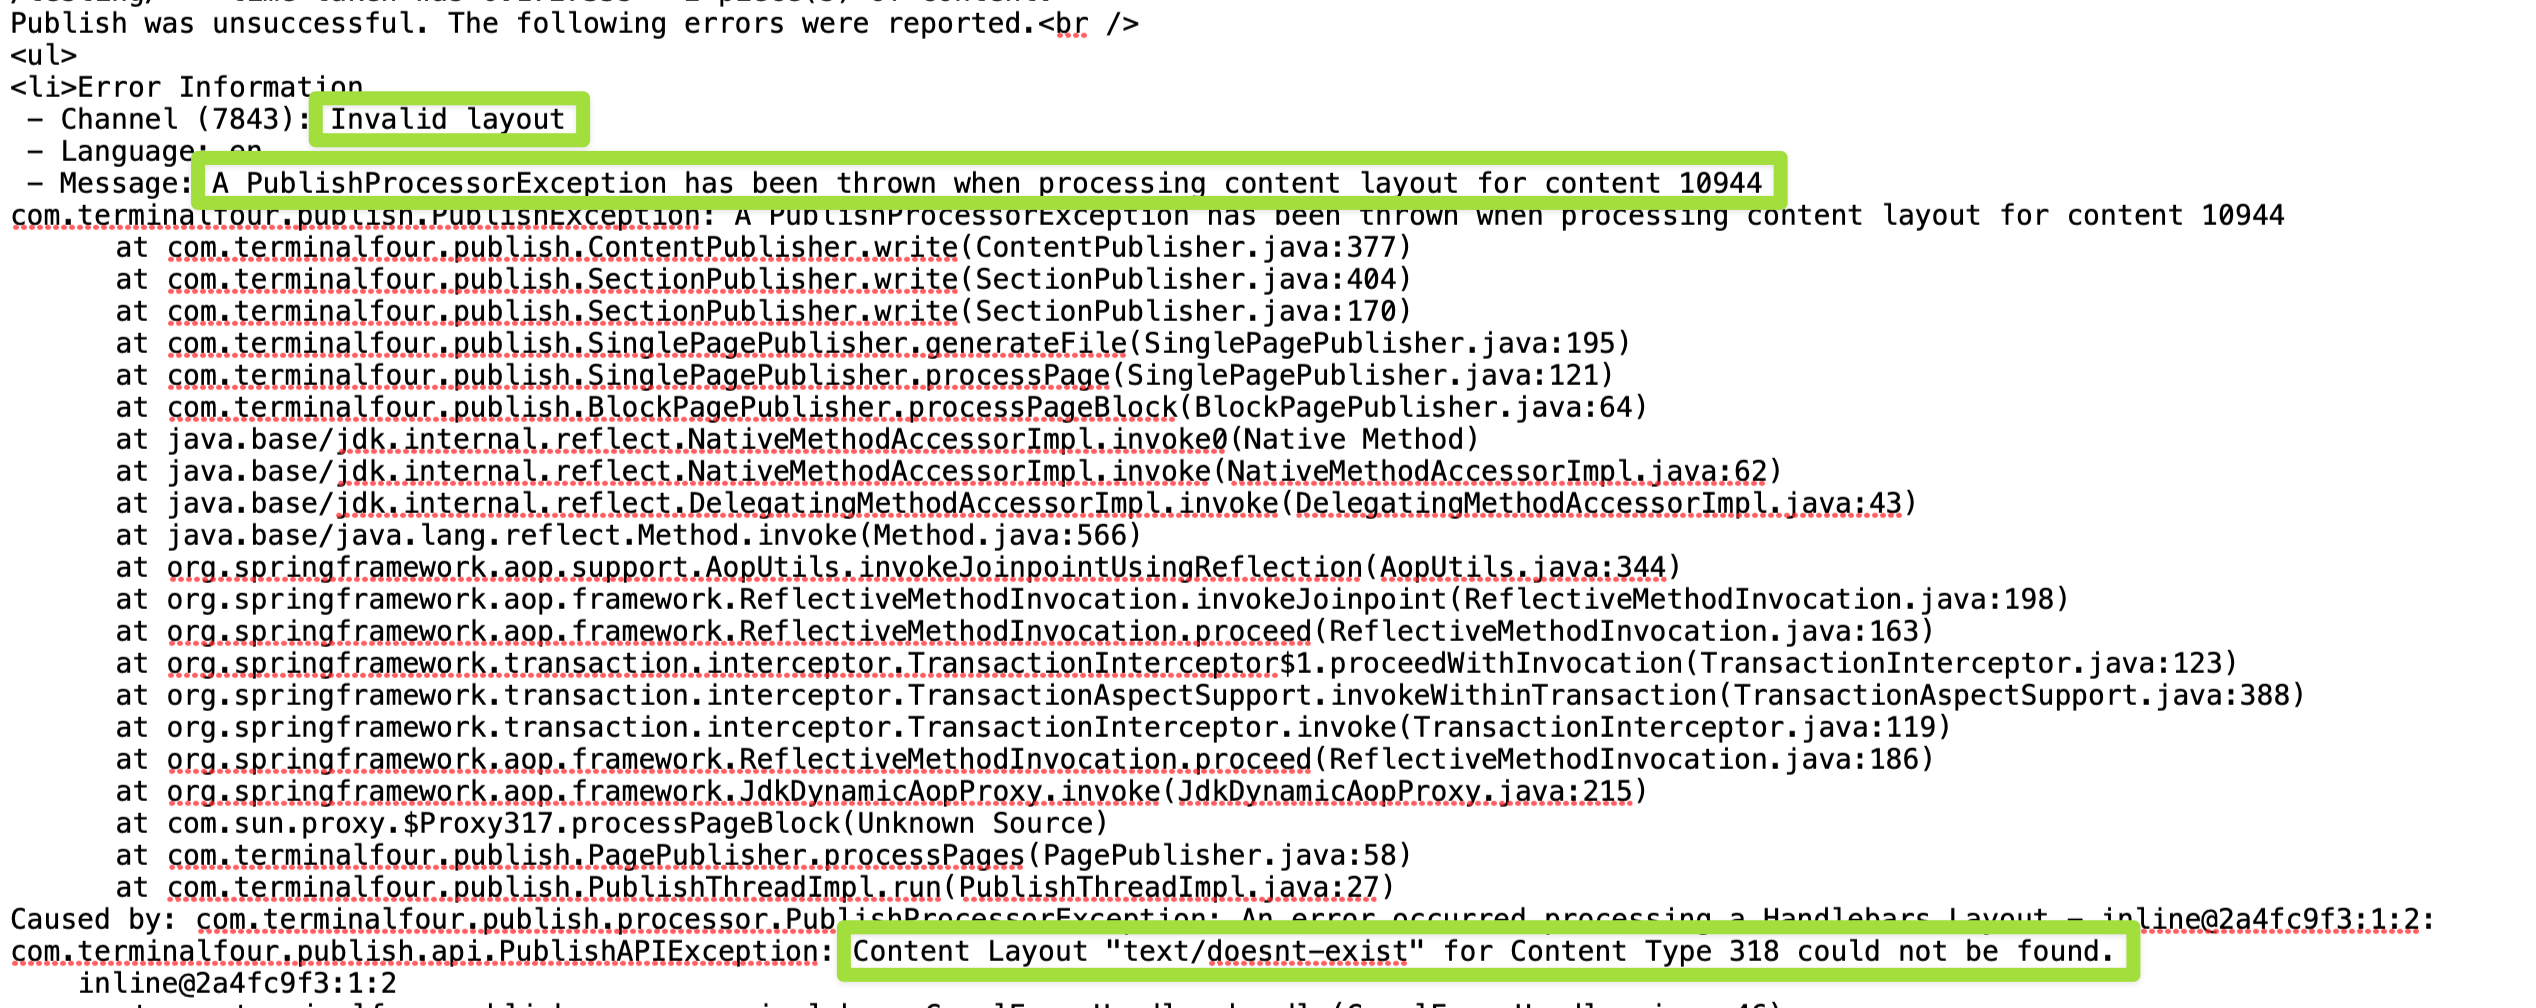 An. excerpt of the logs showing publish errors